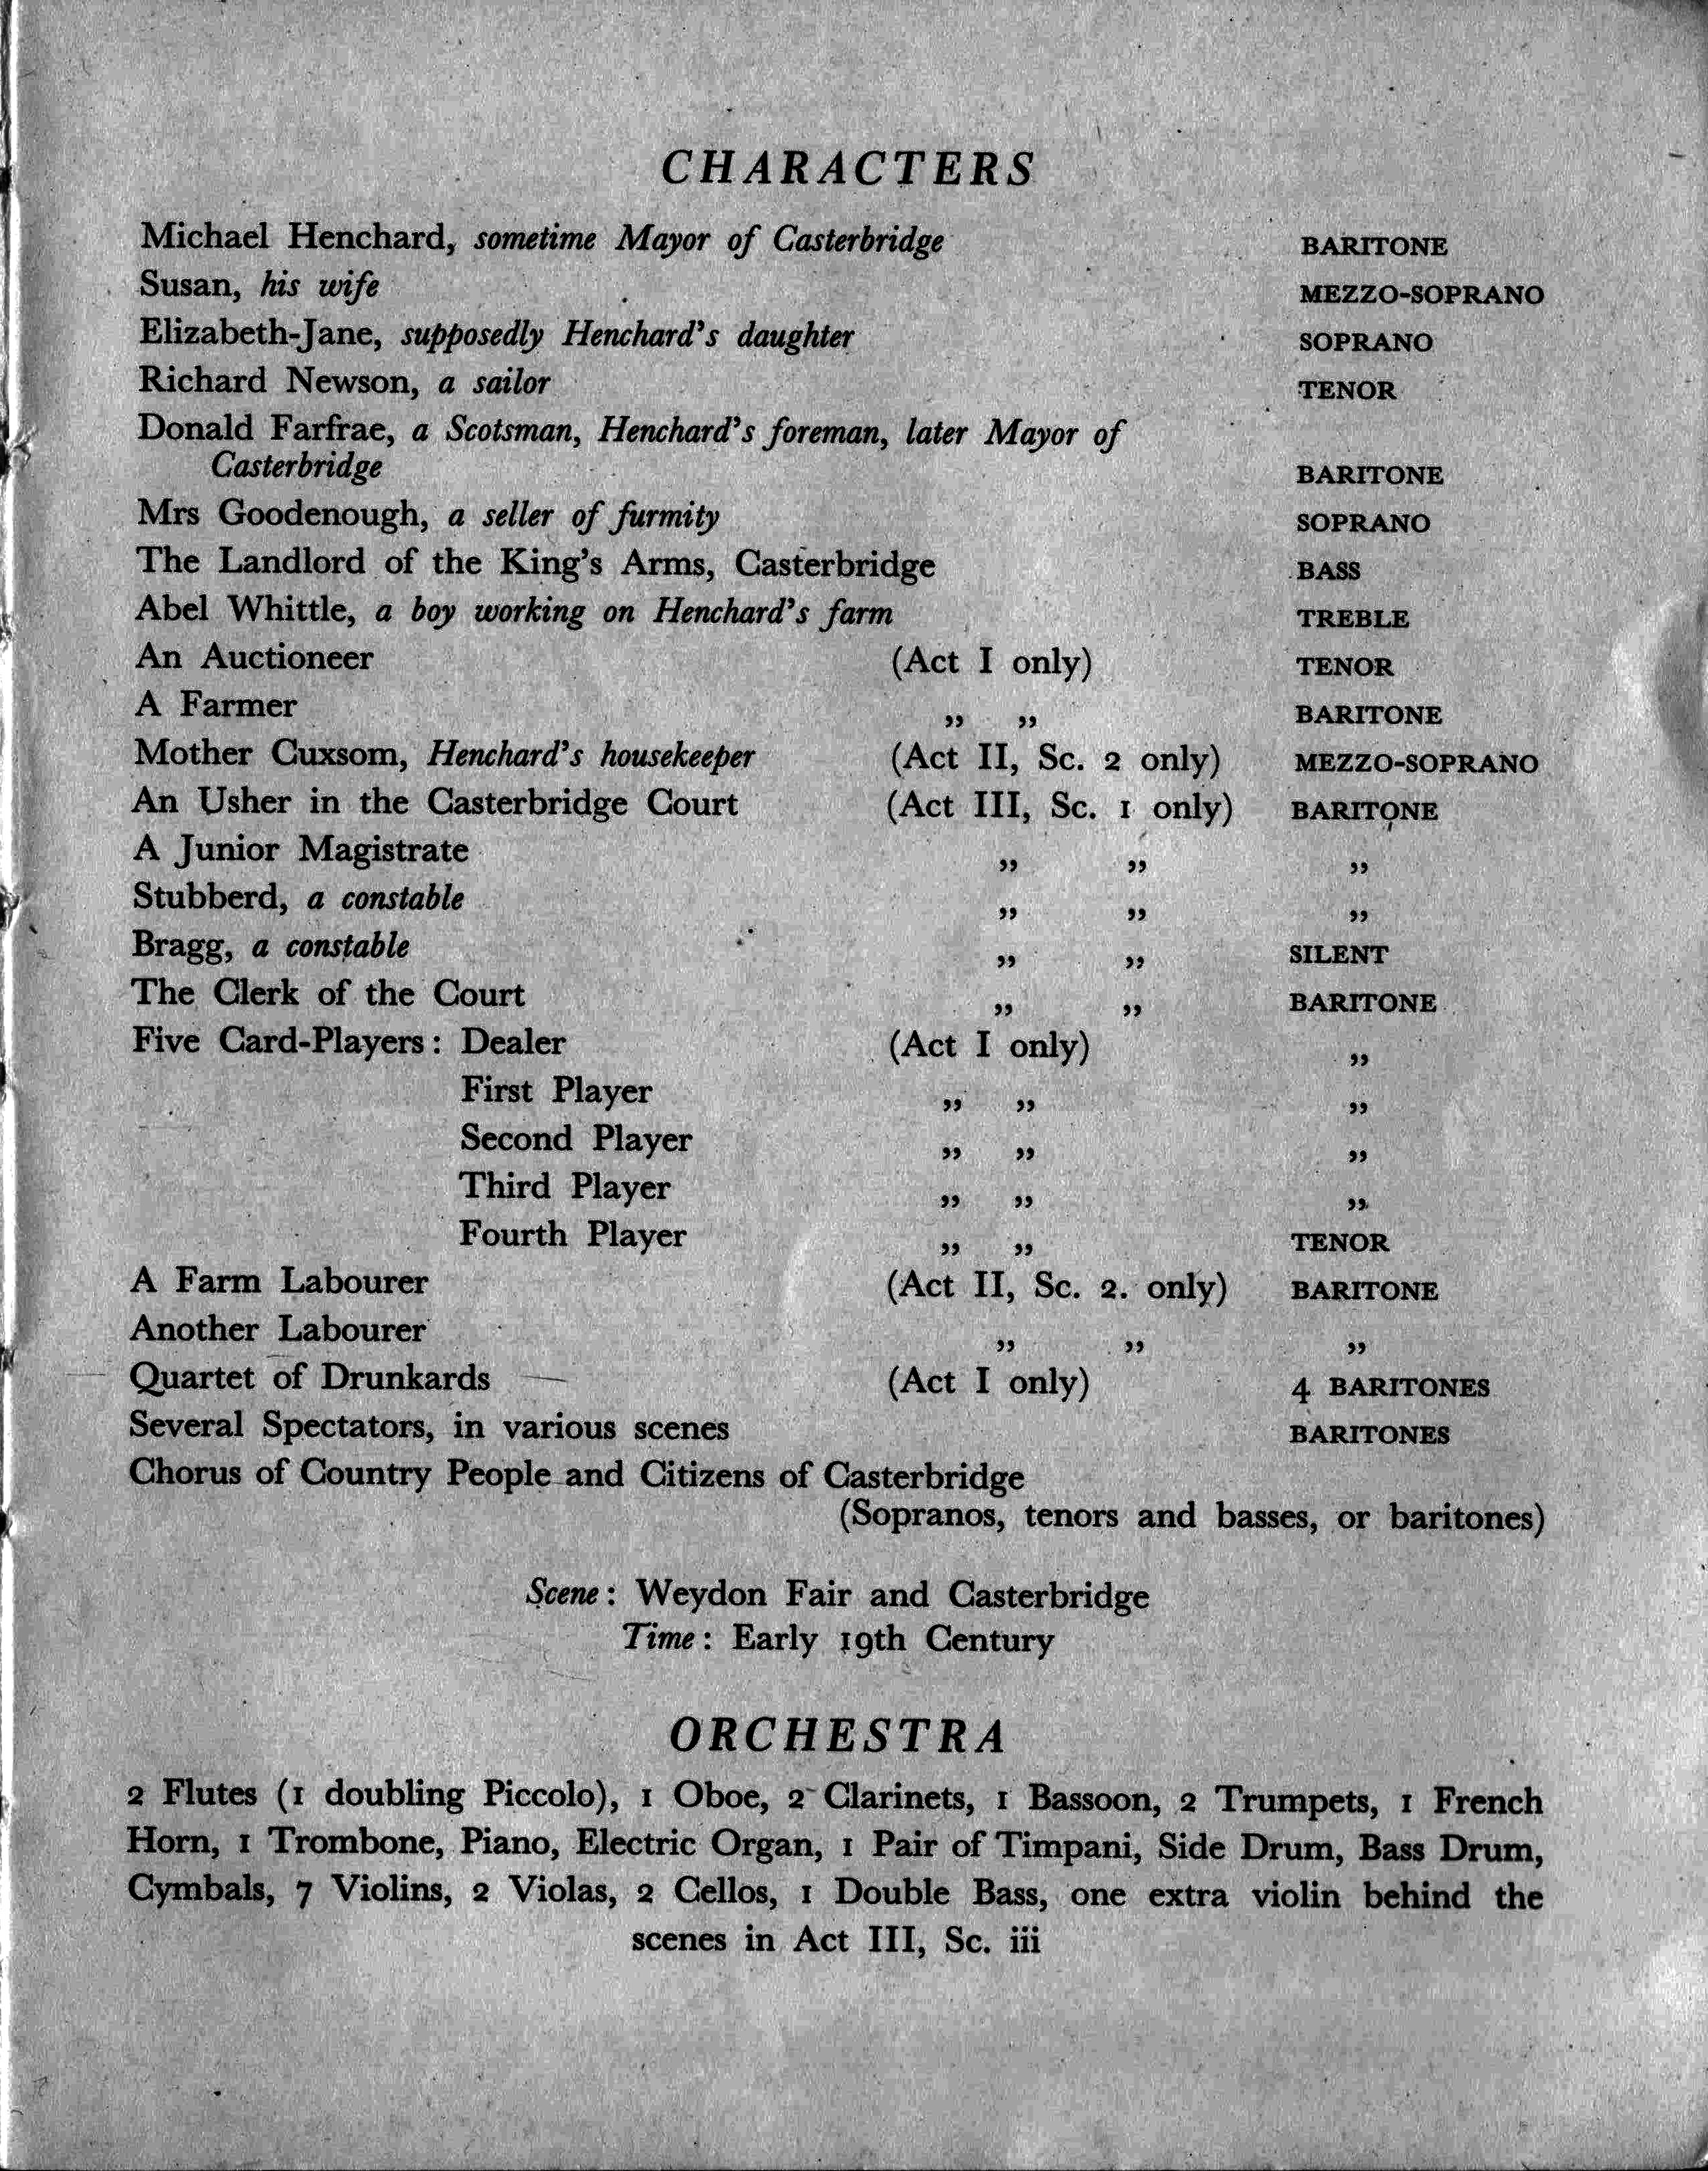 List of characters from the vocal score of The Mayor of Casterbridge, original edition, 1951